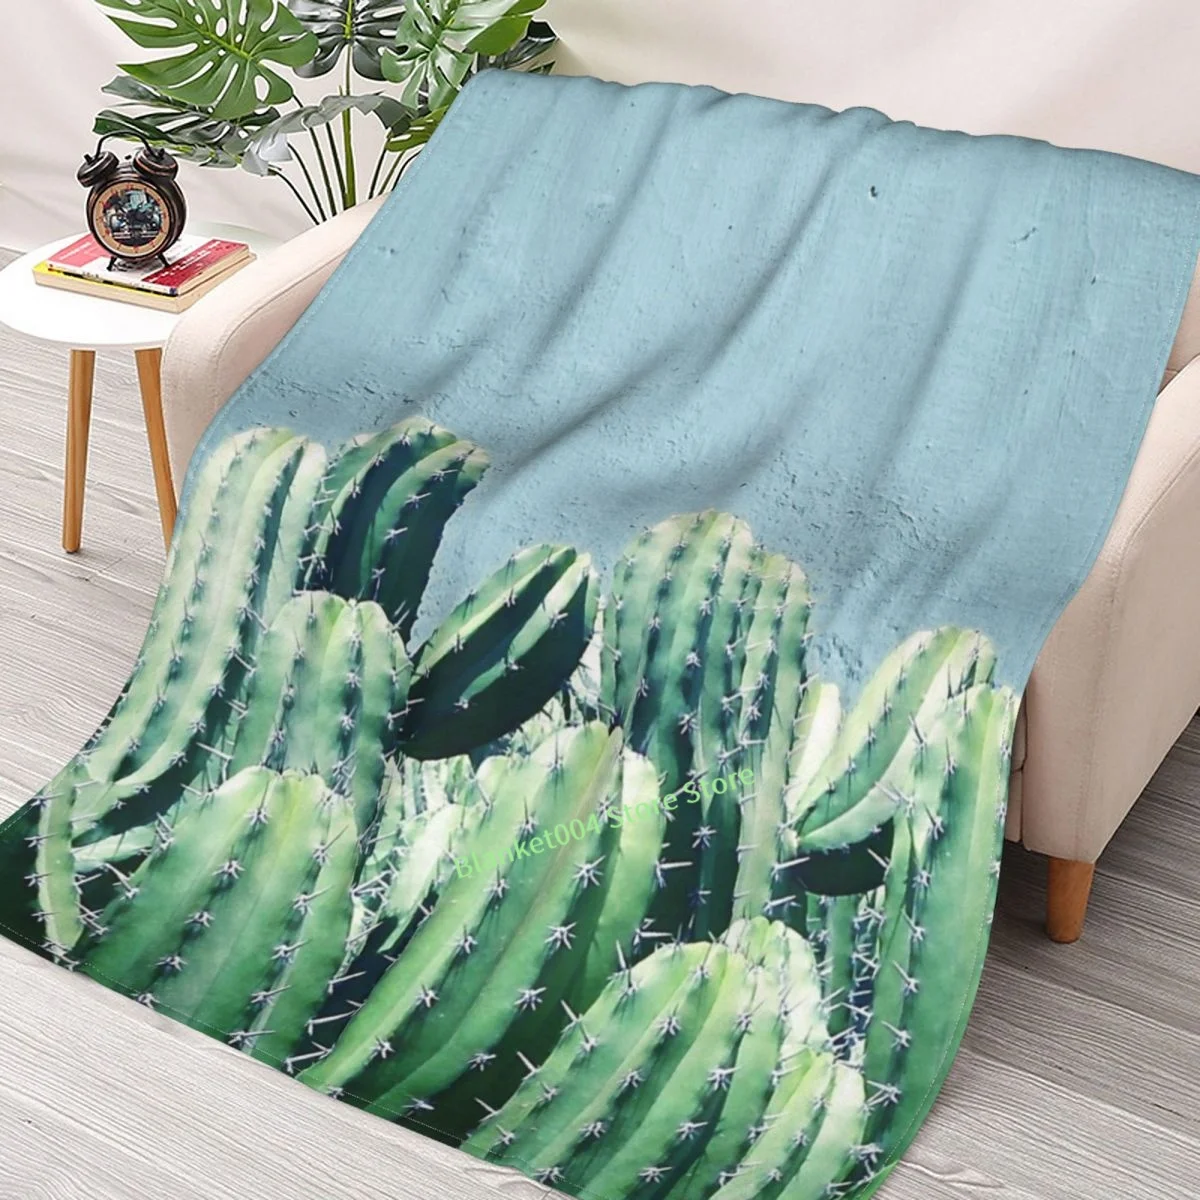 

Cactus & Teal #redbubble #lifestyle Throw Blanket 3D printed sofa bedroom decorative blanket children adult Christmas gift